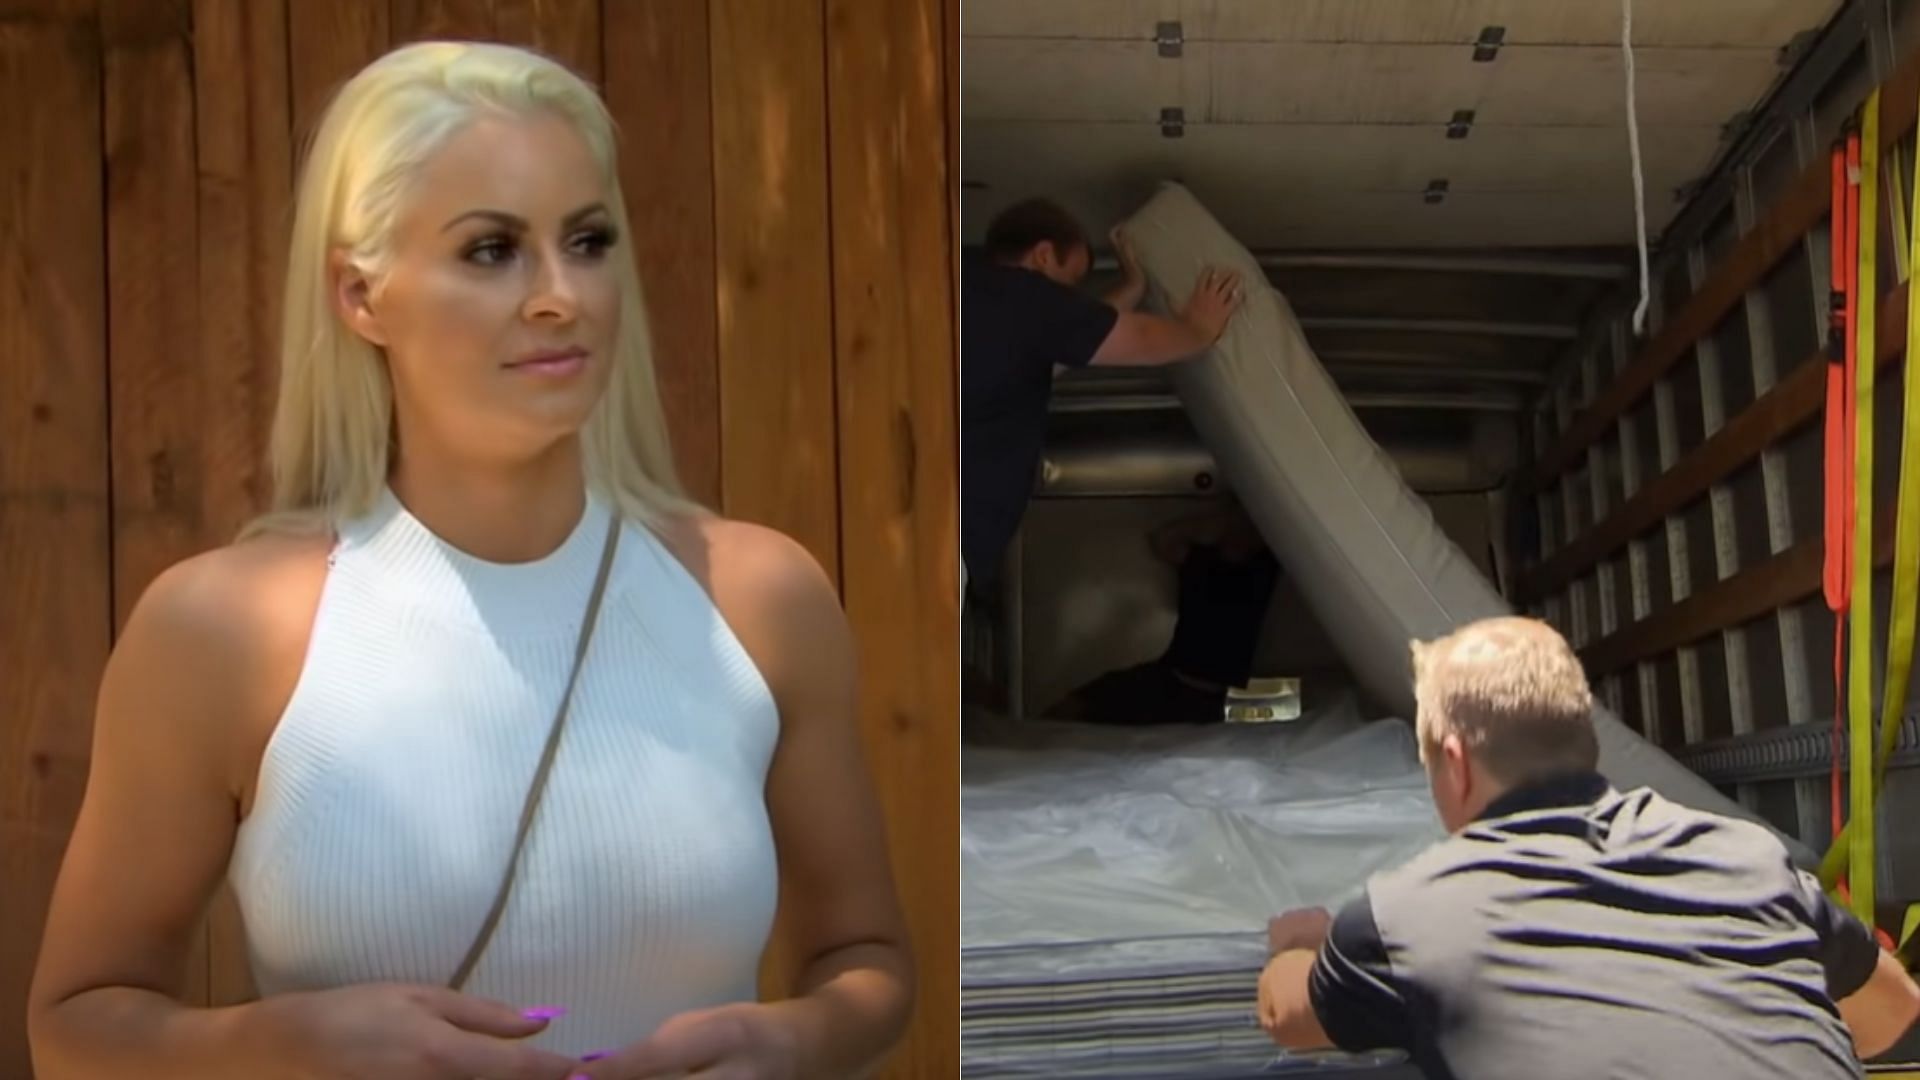 Maryse appeared as a Total Divas cast member in Season 6 and Season 7